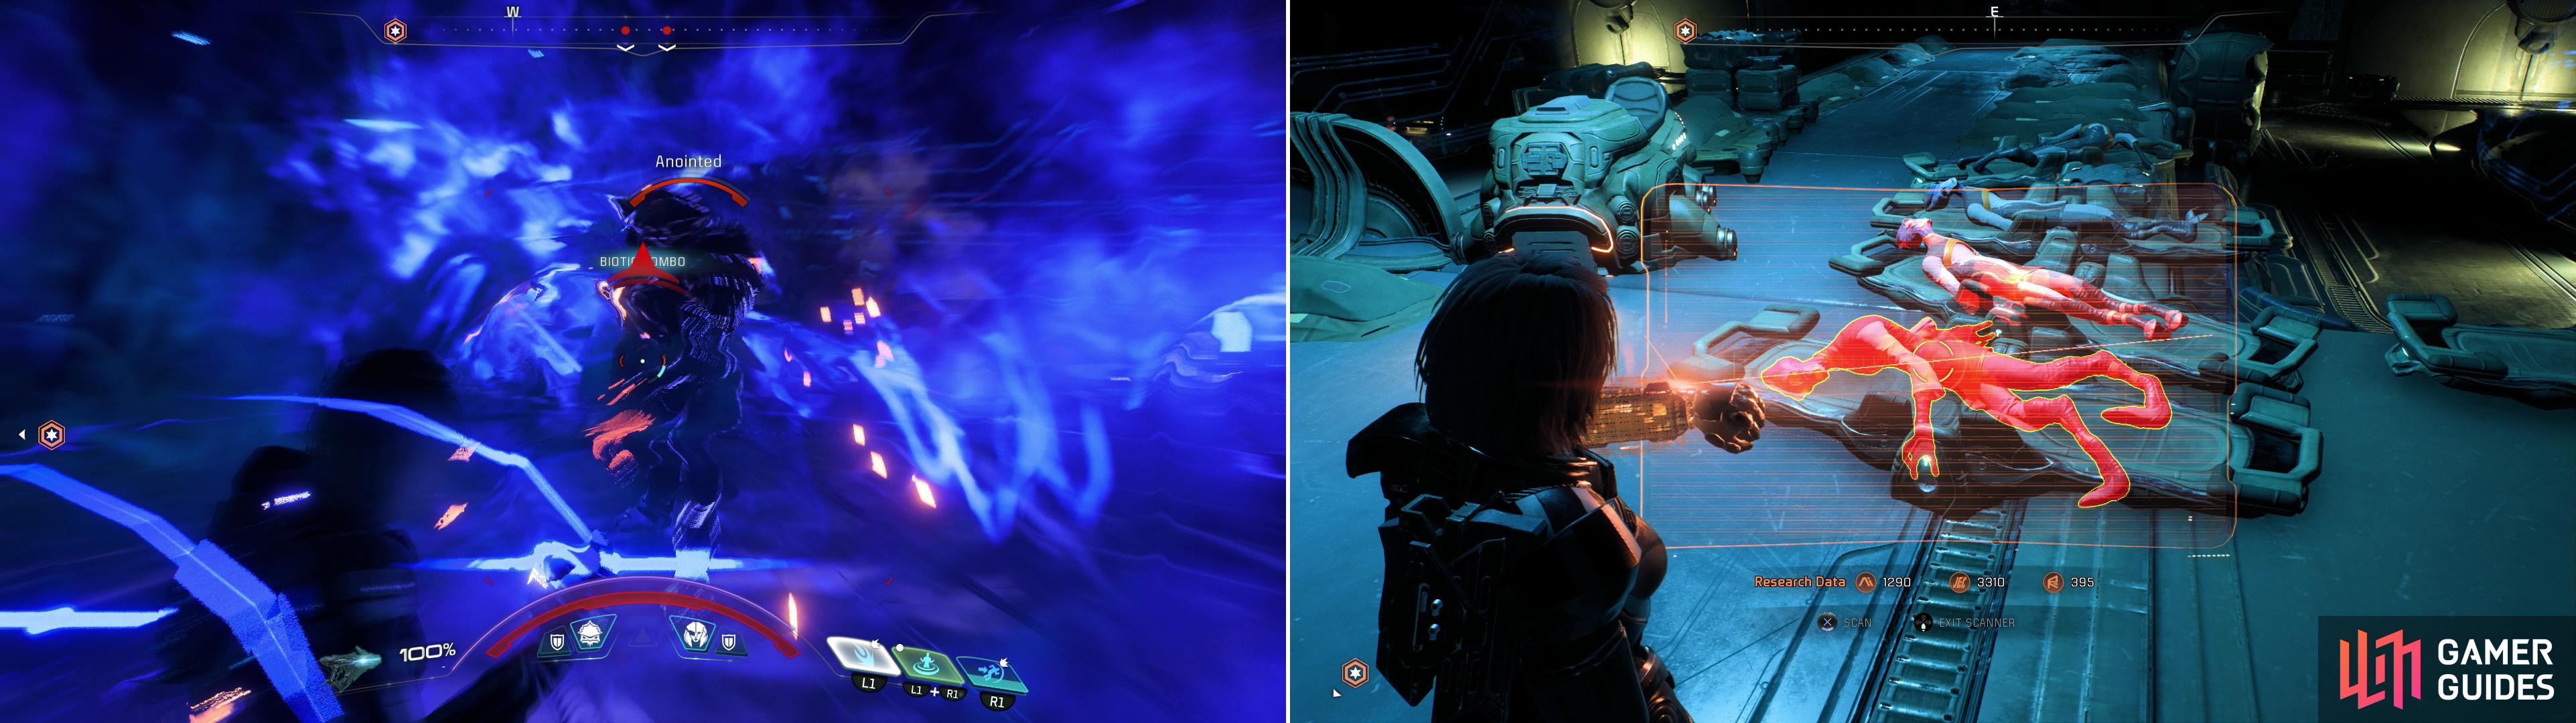 Slaughter your way through some Kett laboratories (left) where you’ll find gruesome evidence of how poorly the Kett have treated the Salarian colonists (right).